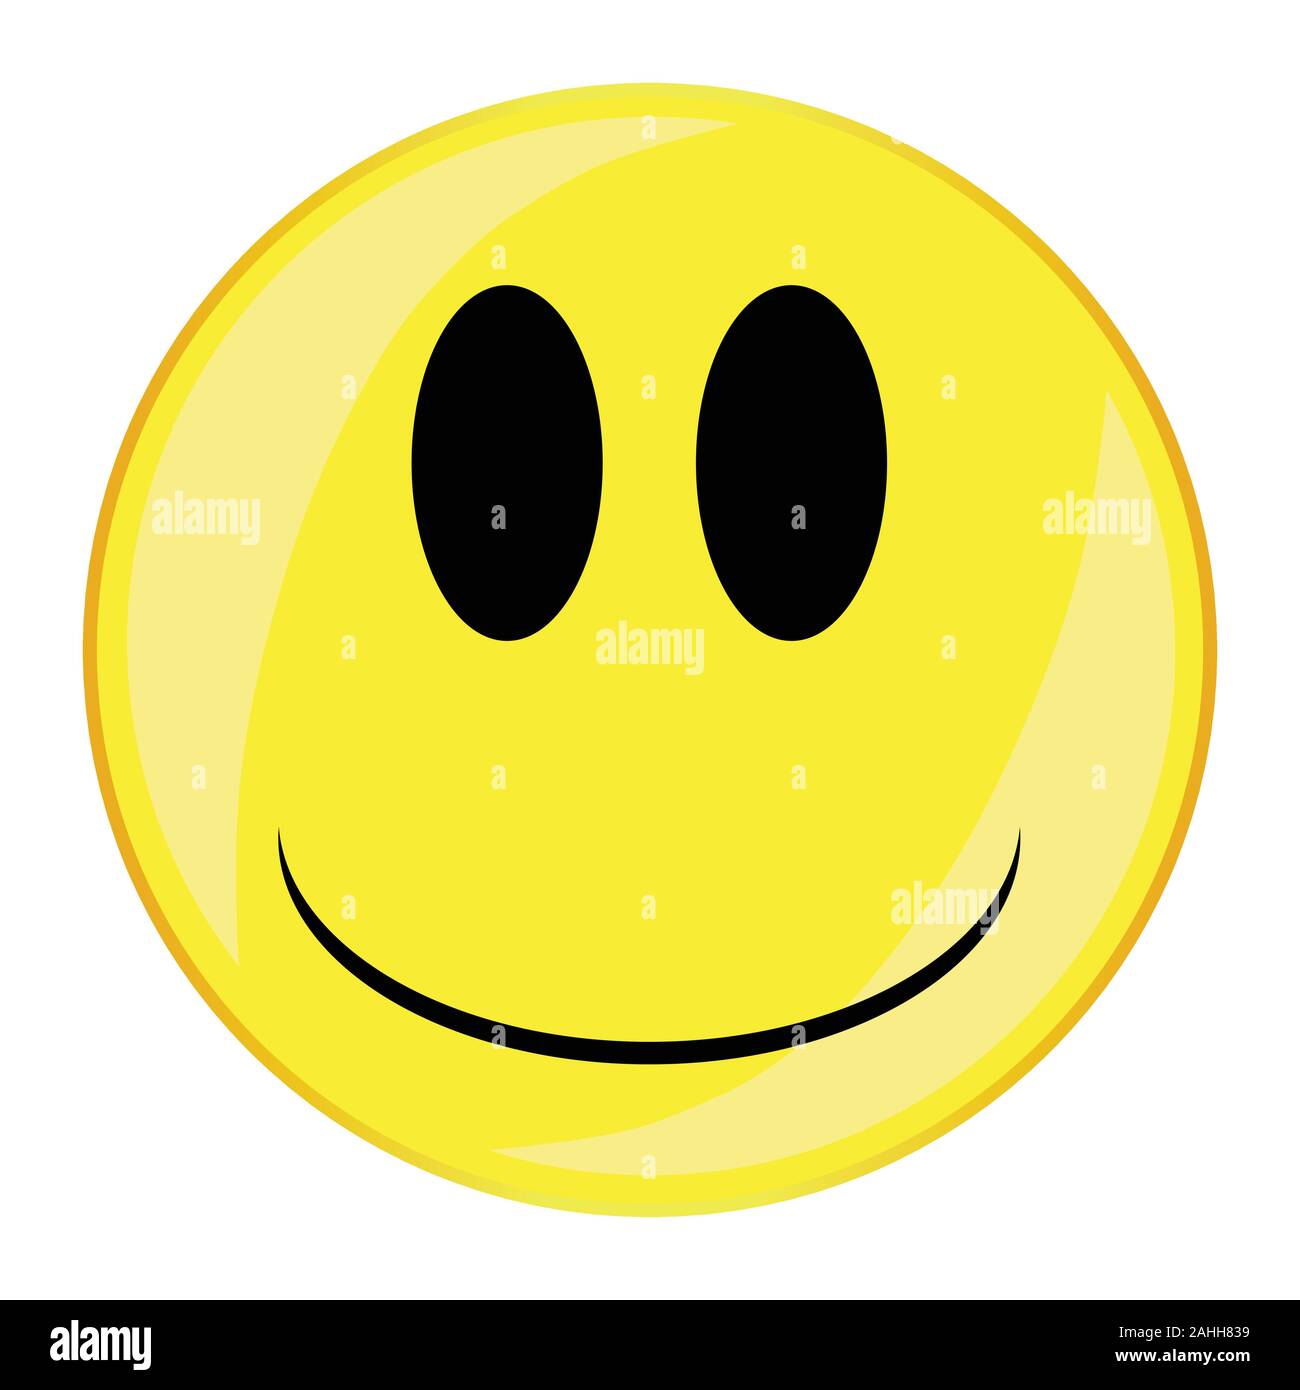 A glum smile face button isolated on a white background Stock Vector